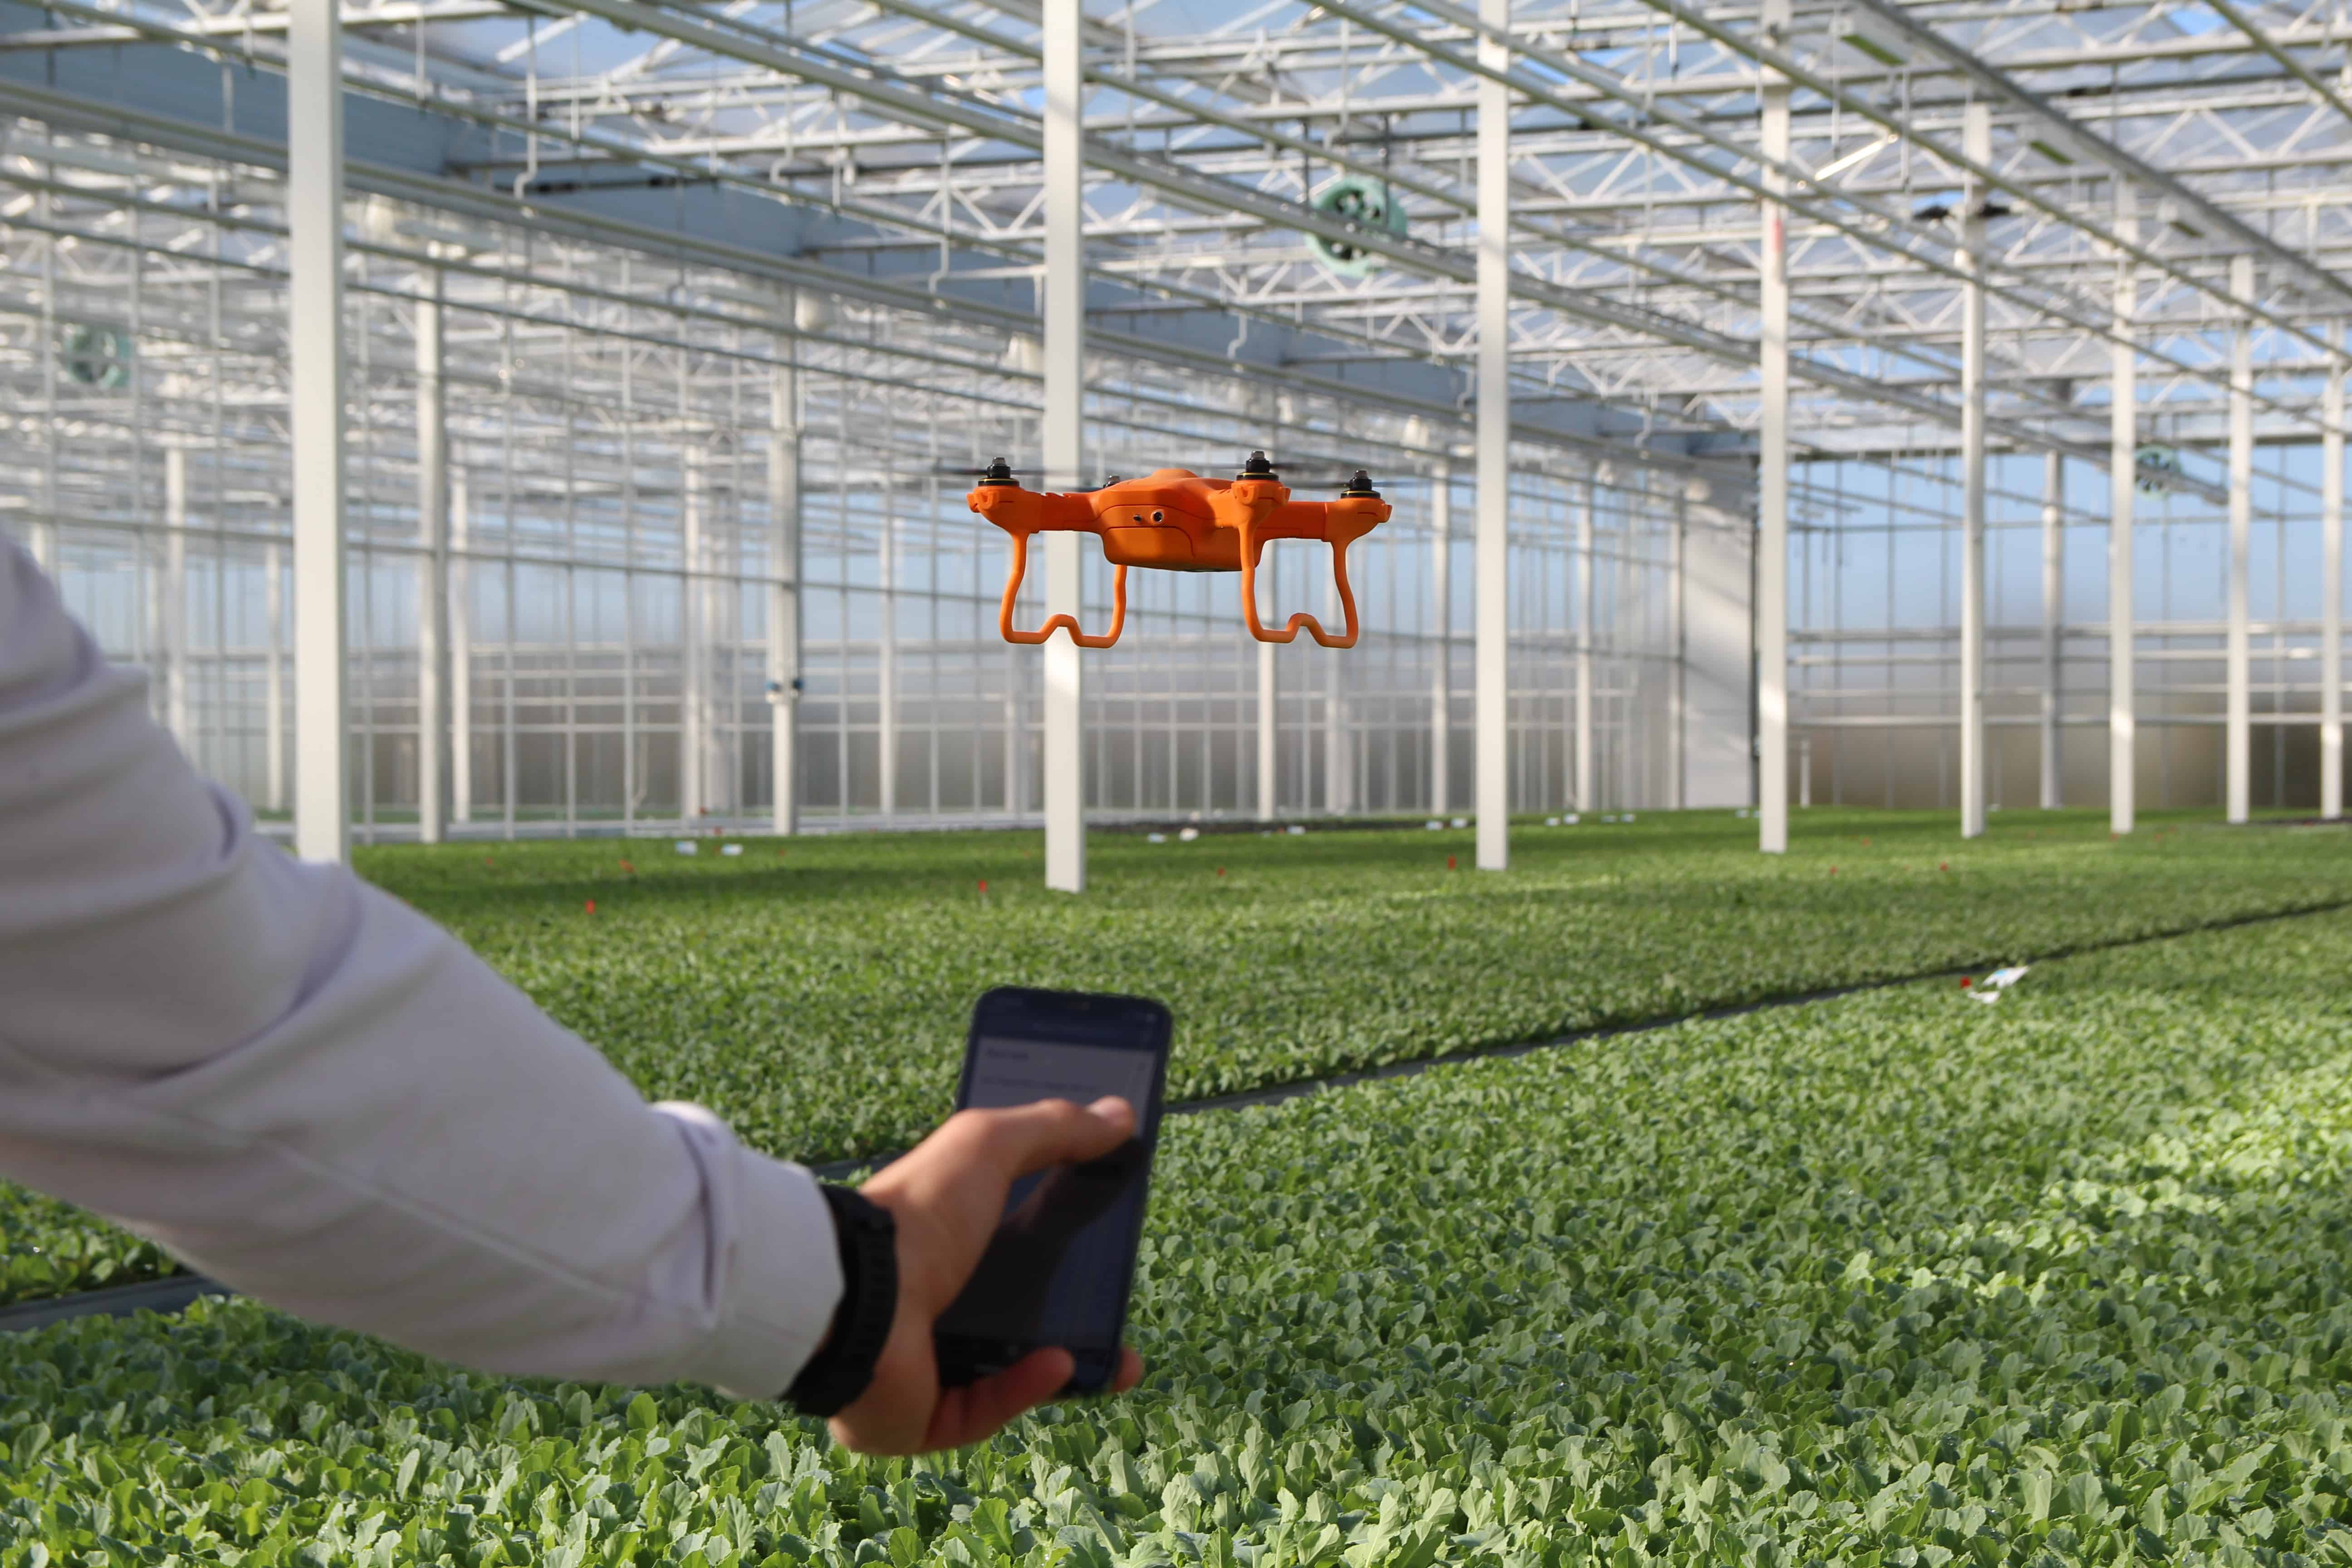 Autonomous drone sees plants actually growing in greenhouses